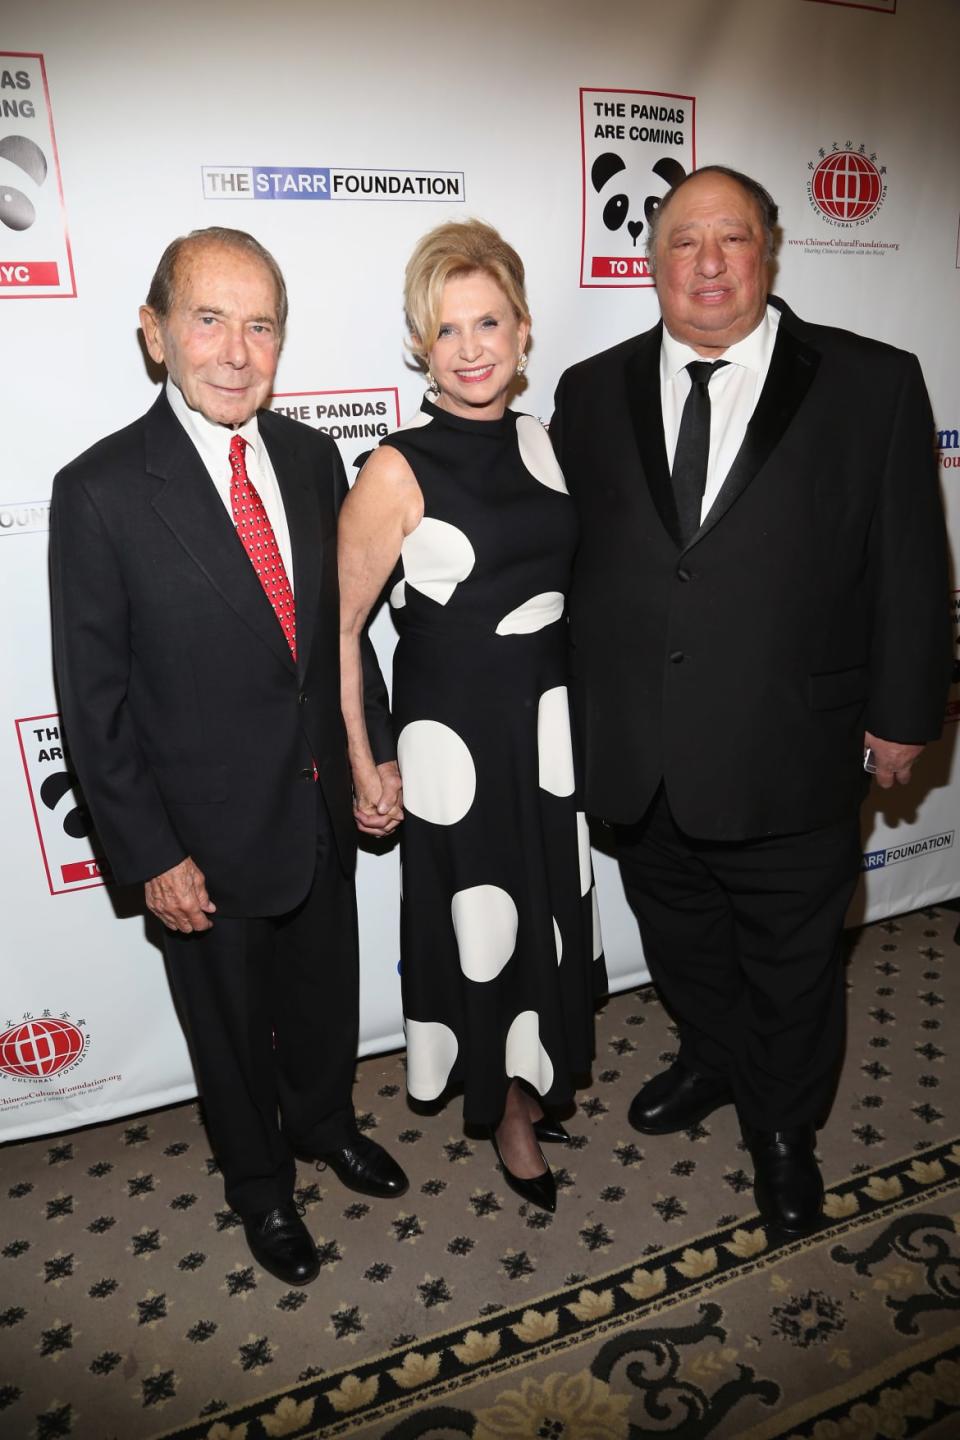 <div class="inline-image__caption"><p>Maurice Greenberg, Rep. Carolyn Maloney, and John Catsimatidis attend First Annual Black & White Panda Ball at The Waldorf-Astoria Starlight Roof in 2017.</p></div> <div class="inline-image__credit">Sylvain Gaboury/Getty</div>